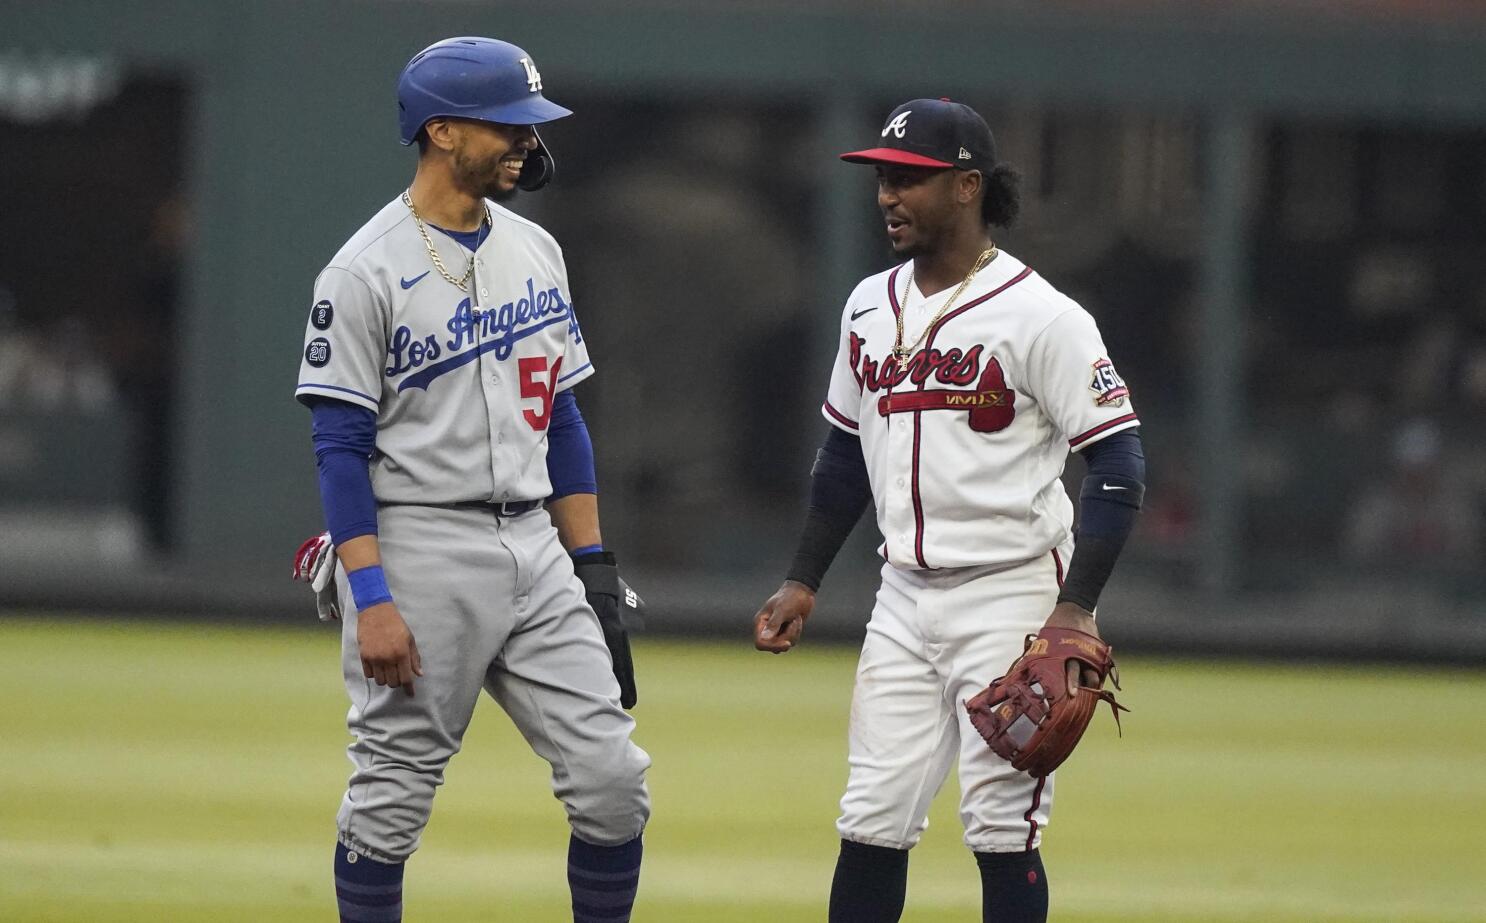 Albies drives in winning run in 9th as Braves beat Dodgers to avoid sweep